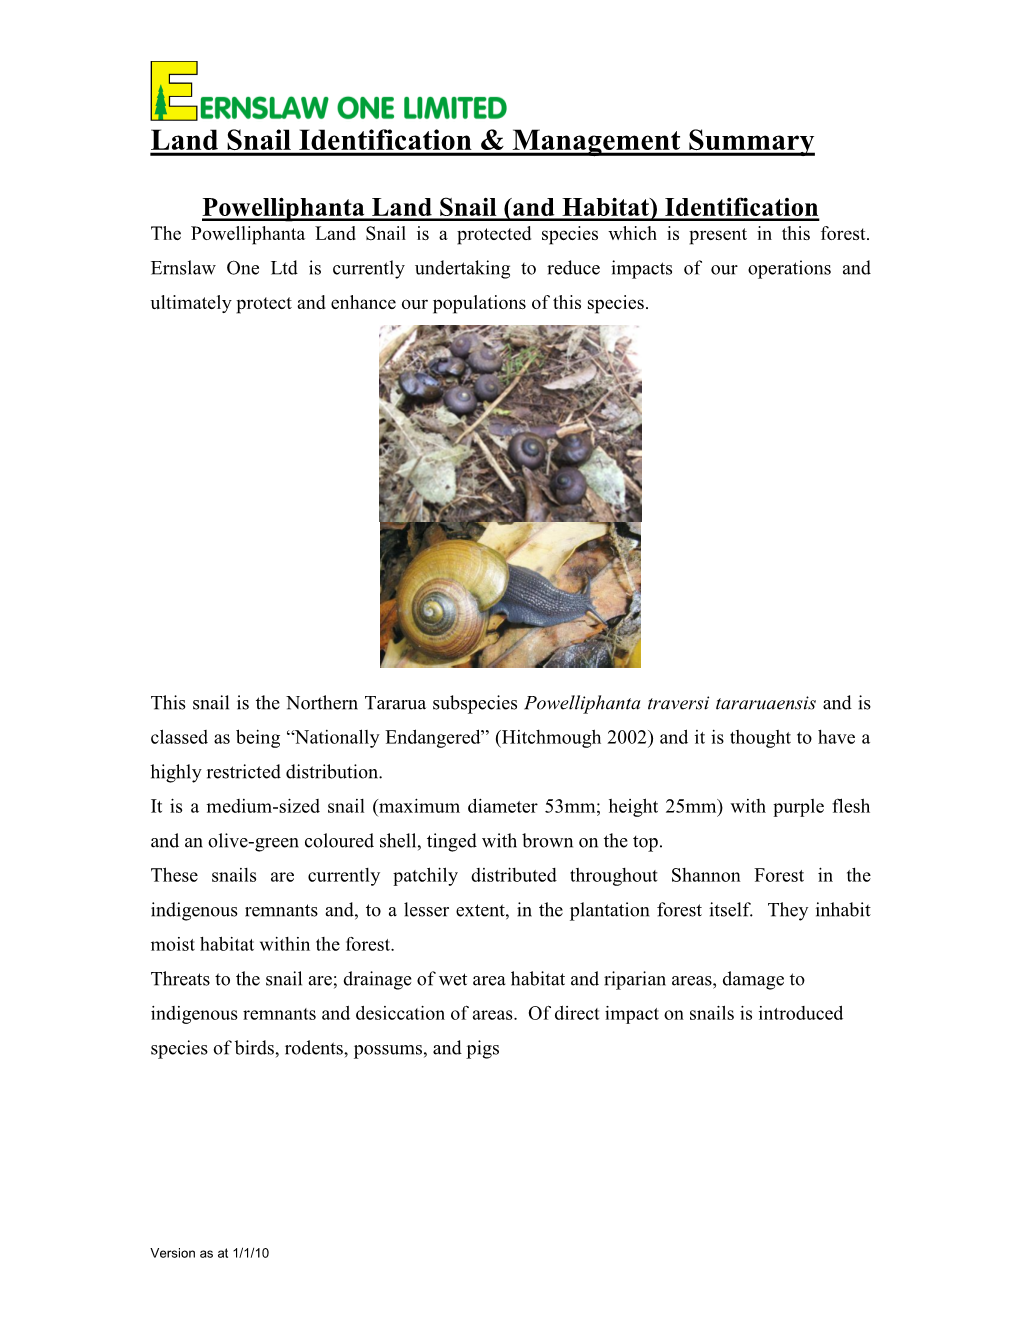 Species Management Plan for Land Snail Populations (Powelliphanta Traversi Tararuaensis) Within Ernslaw One Limited's Shannon